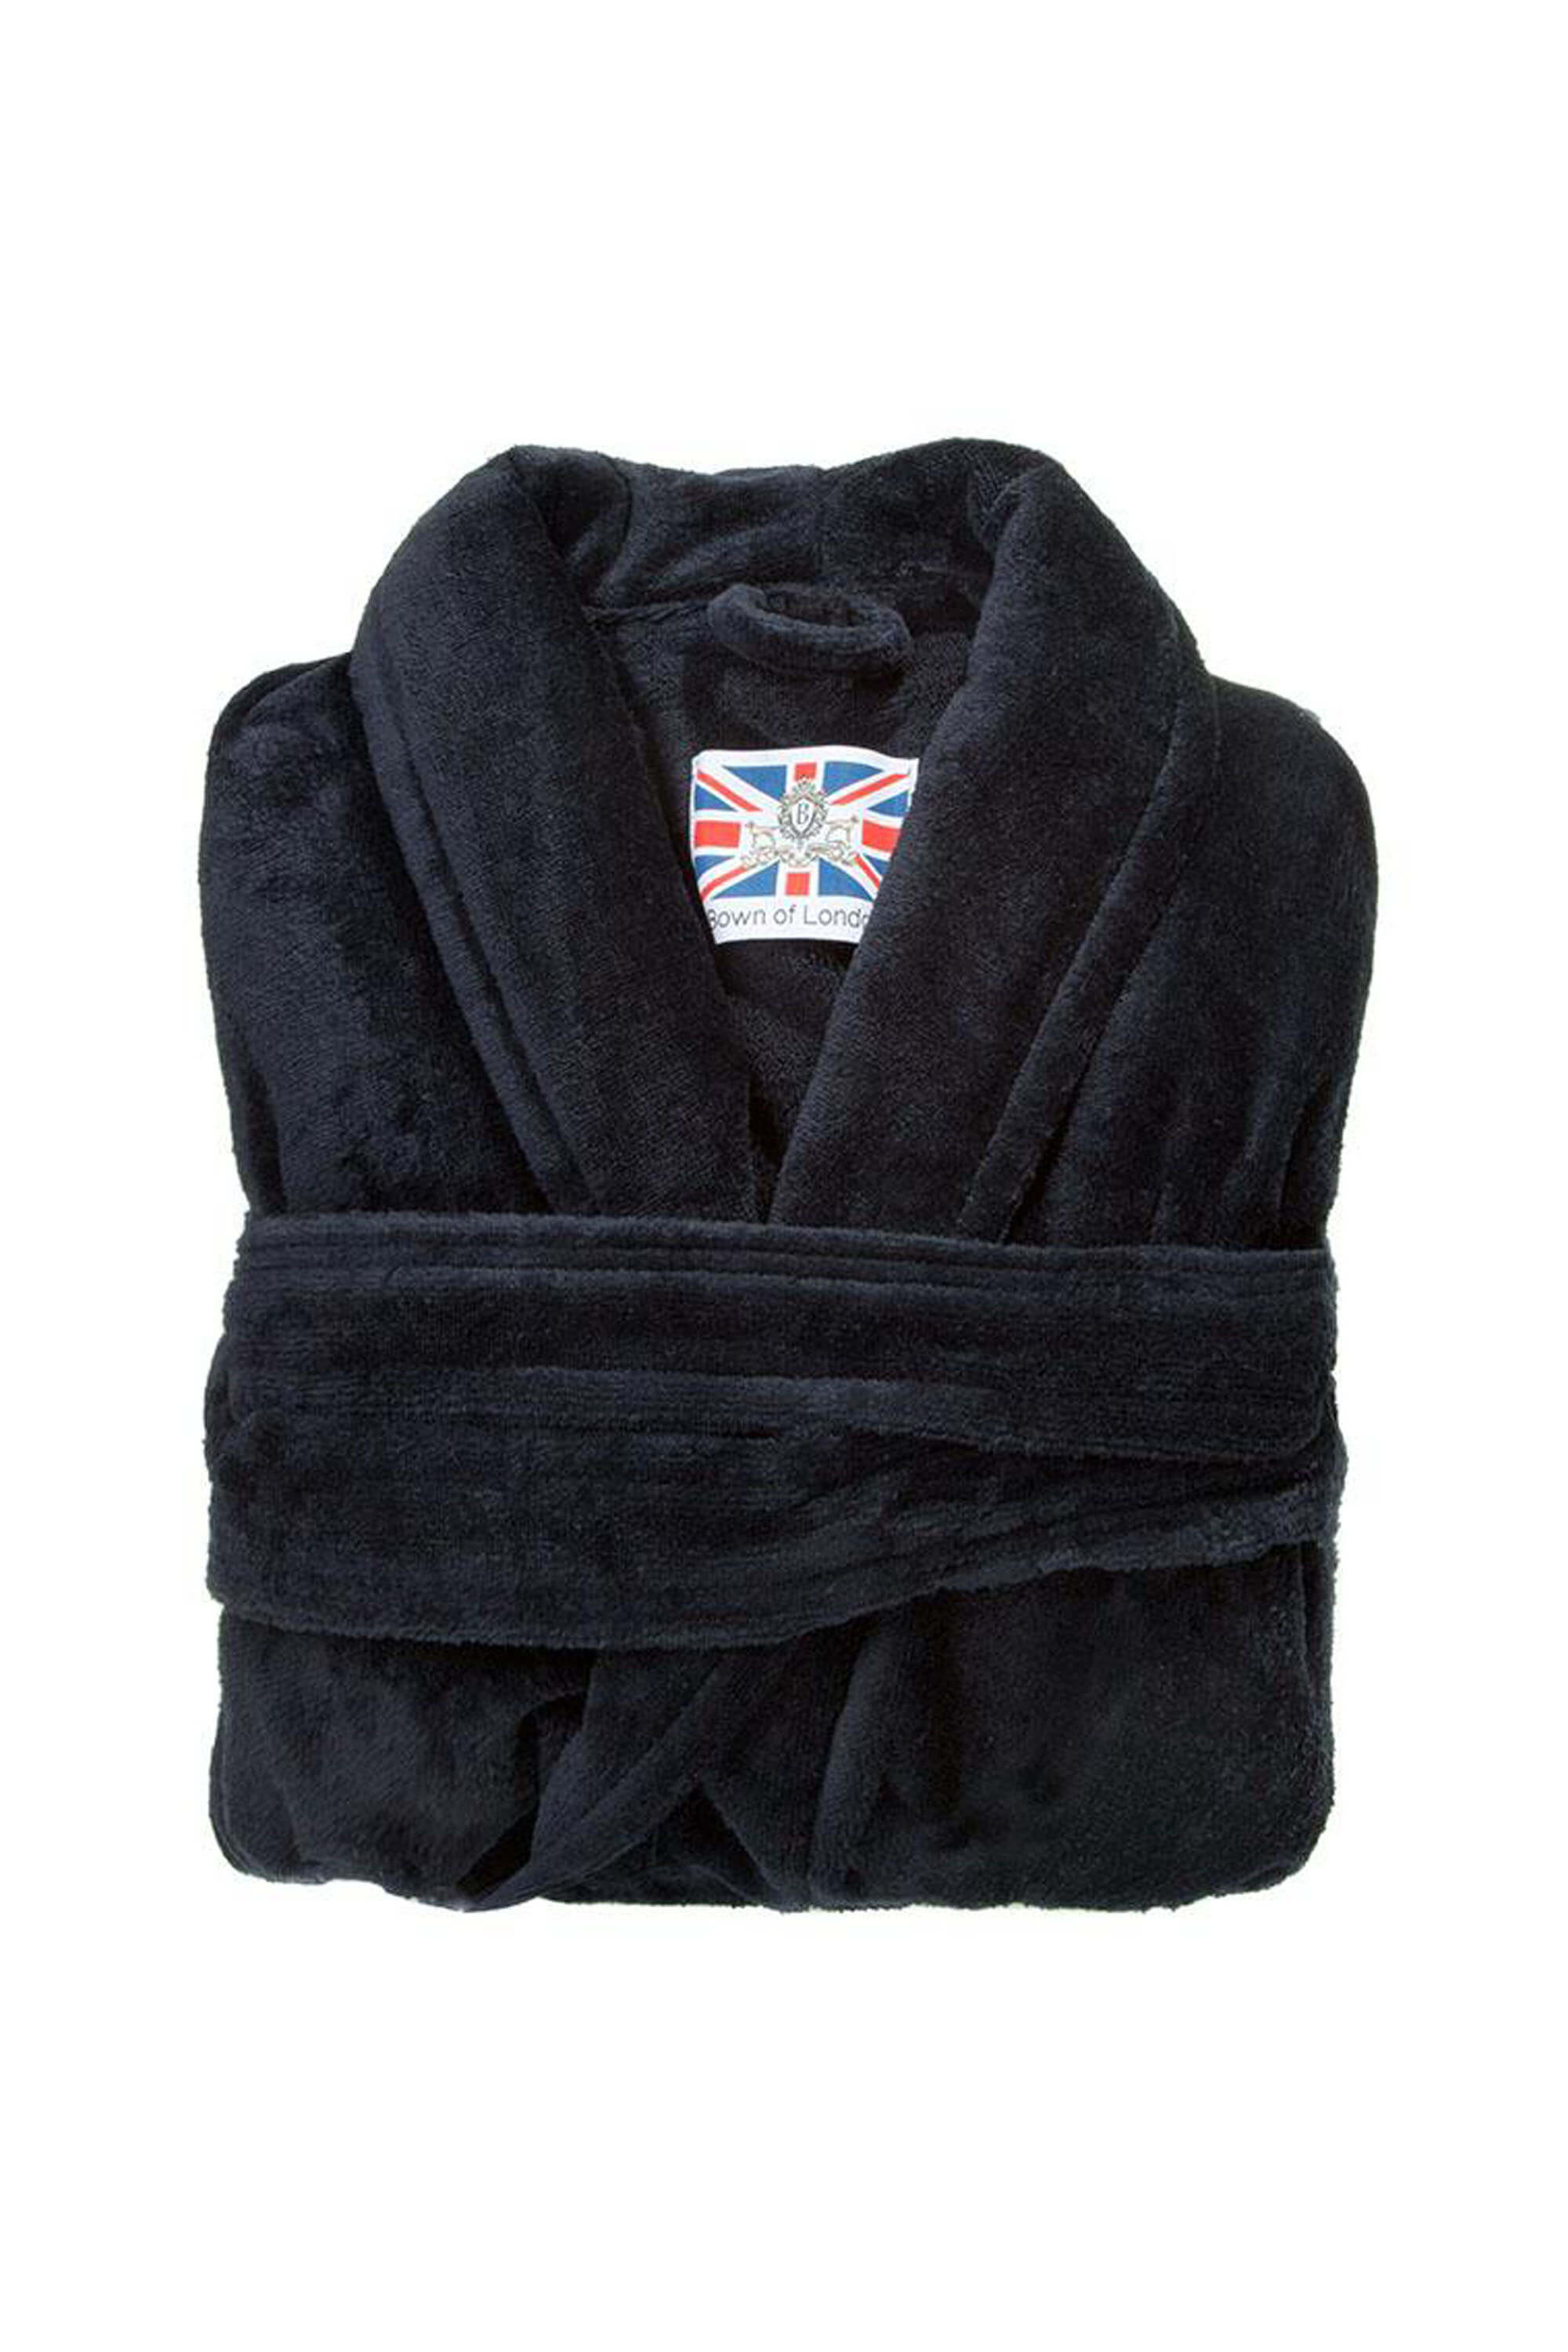 Bown of London Baron Plain Dressing Gown